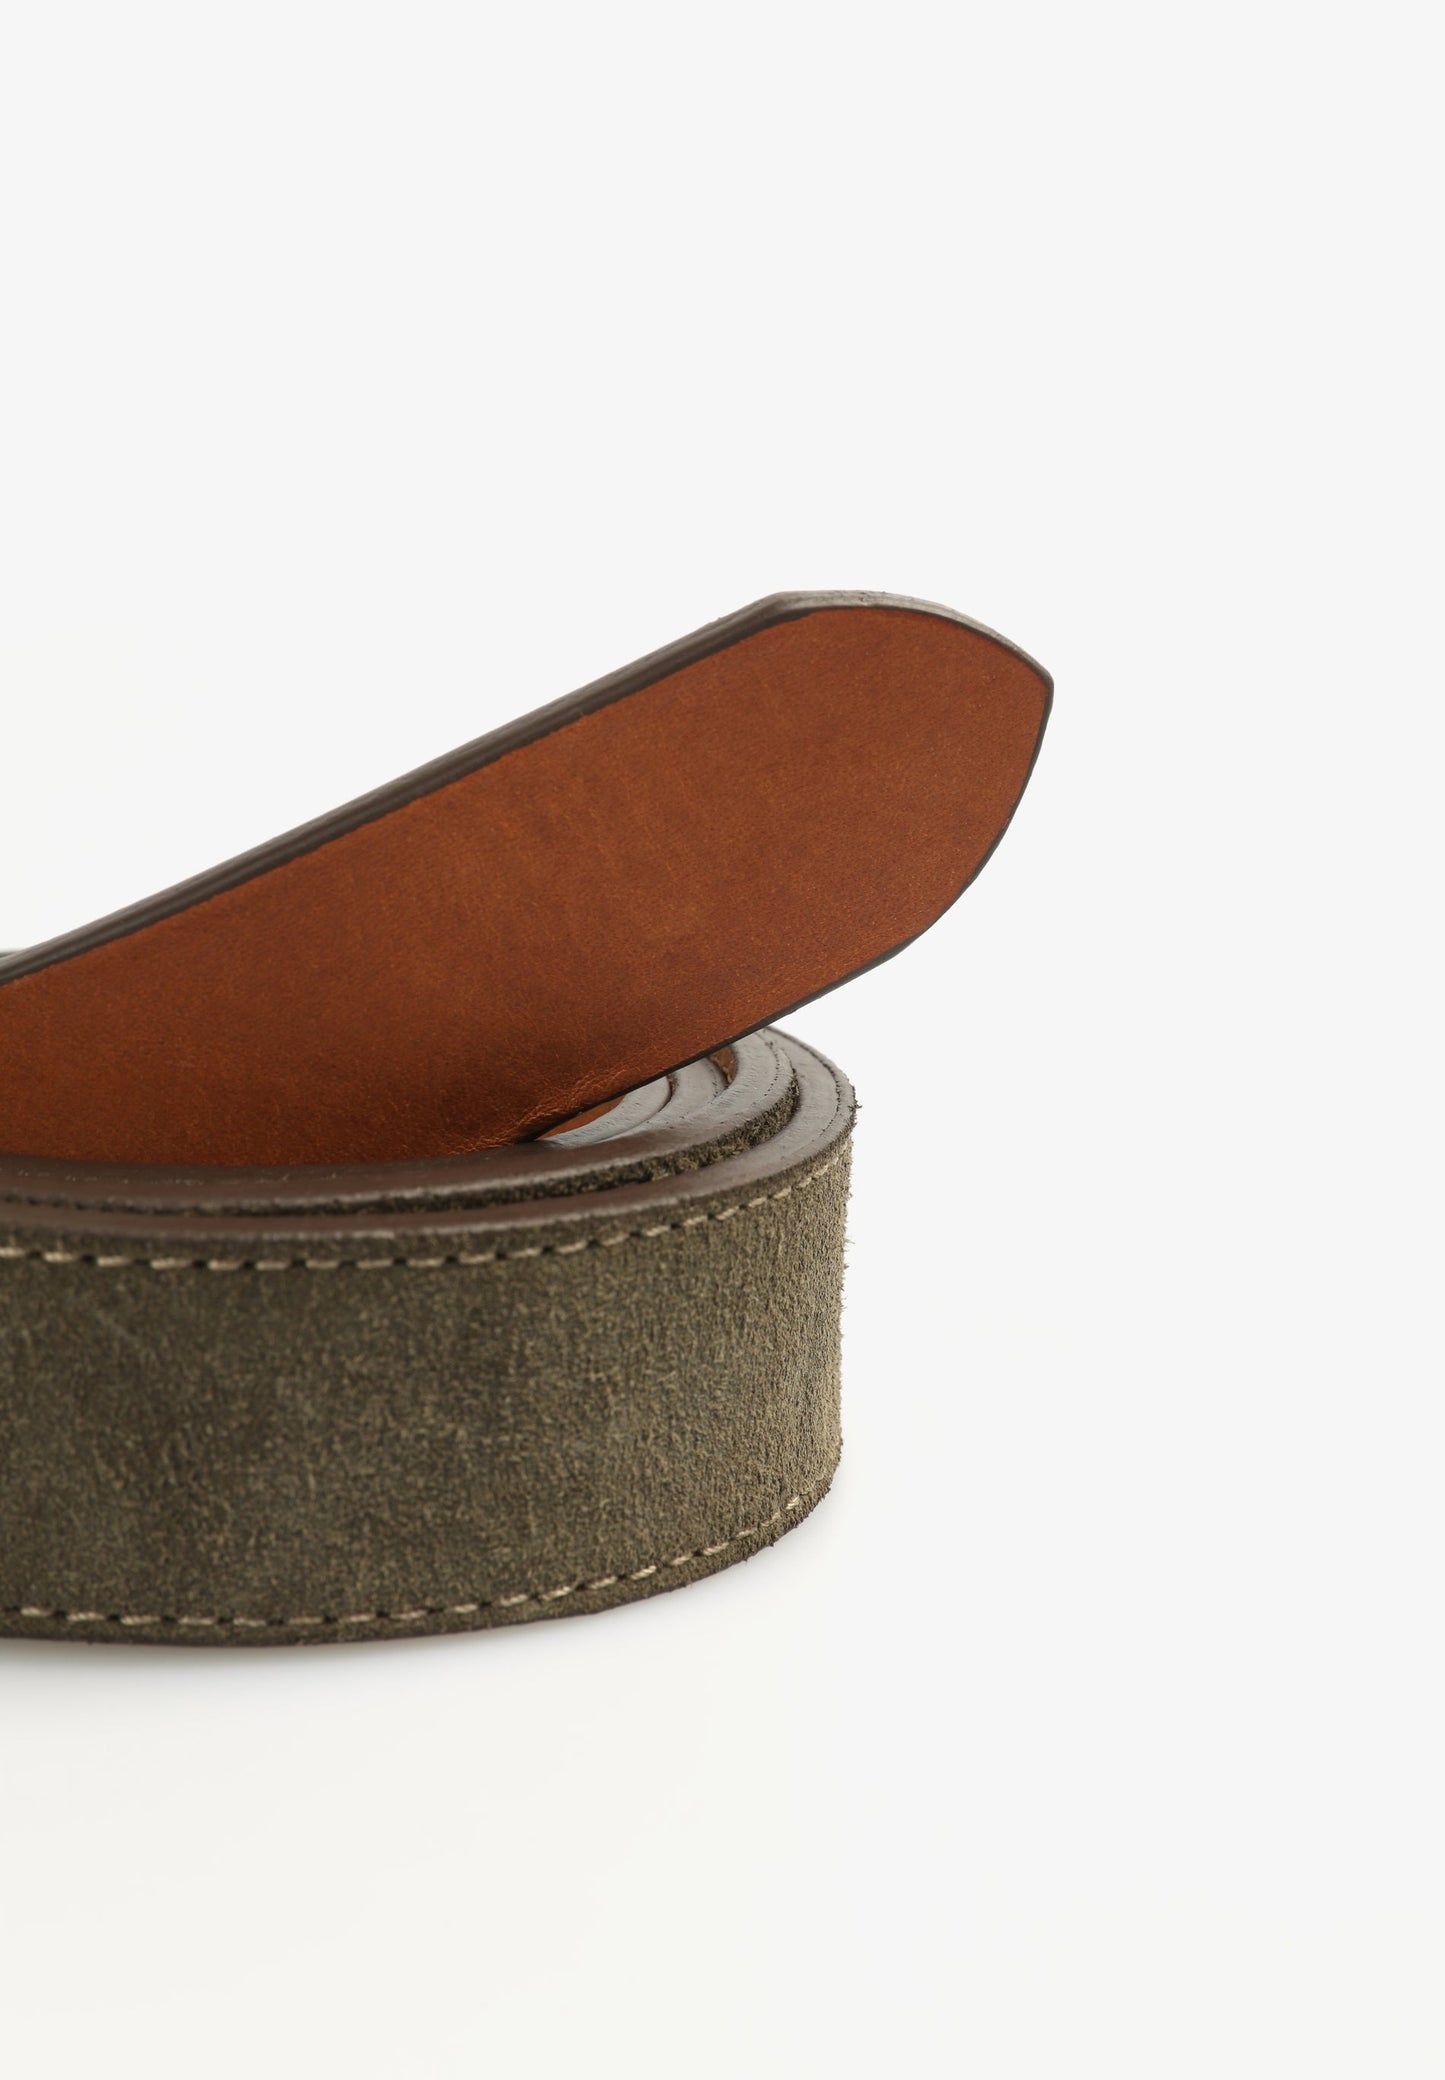 TWO-TONE LEATHER BELT